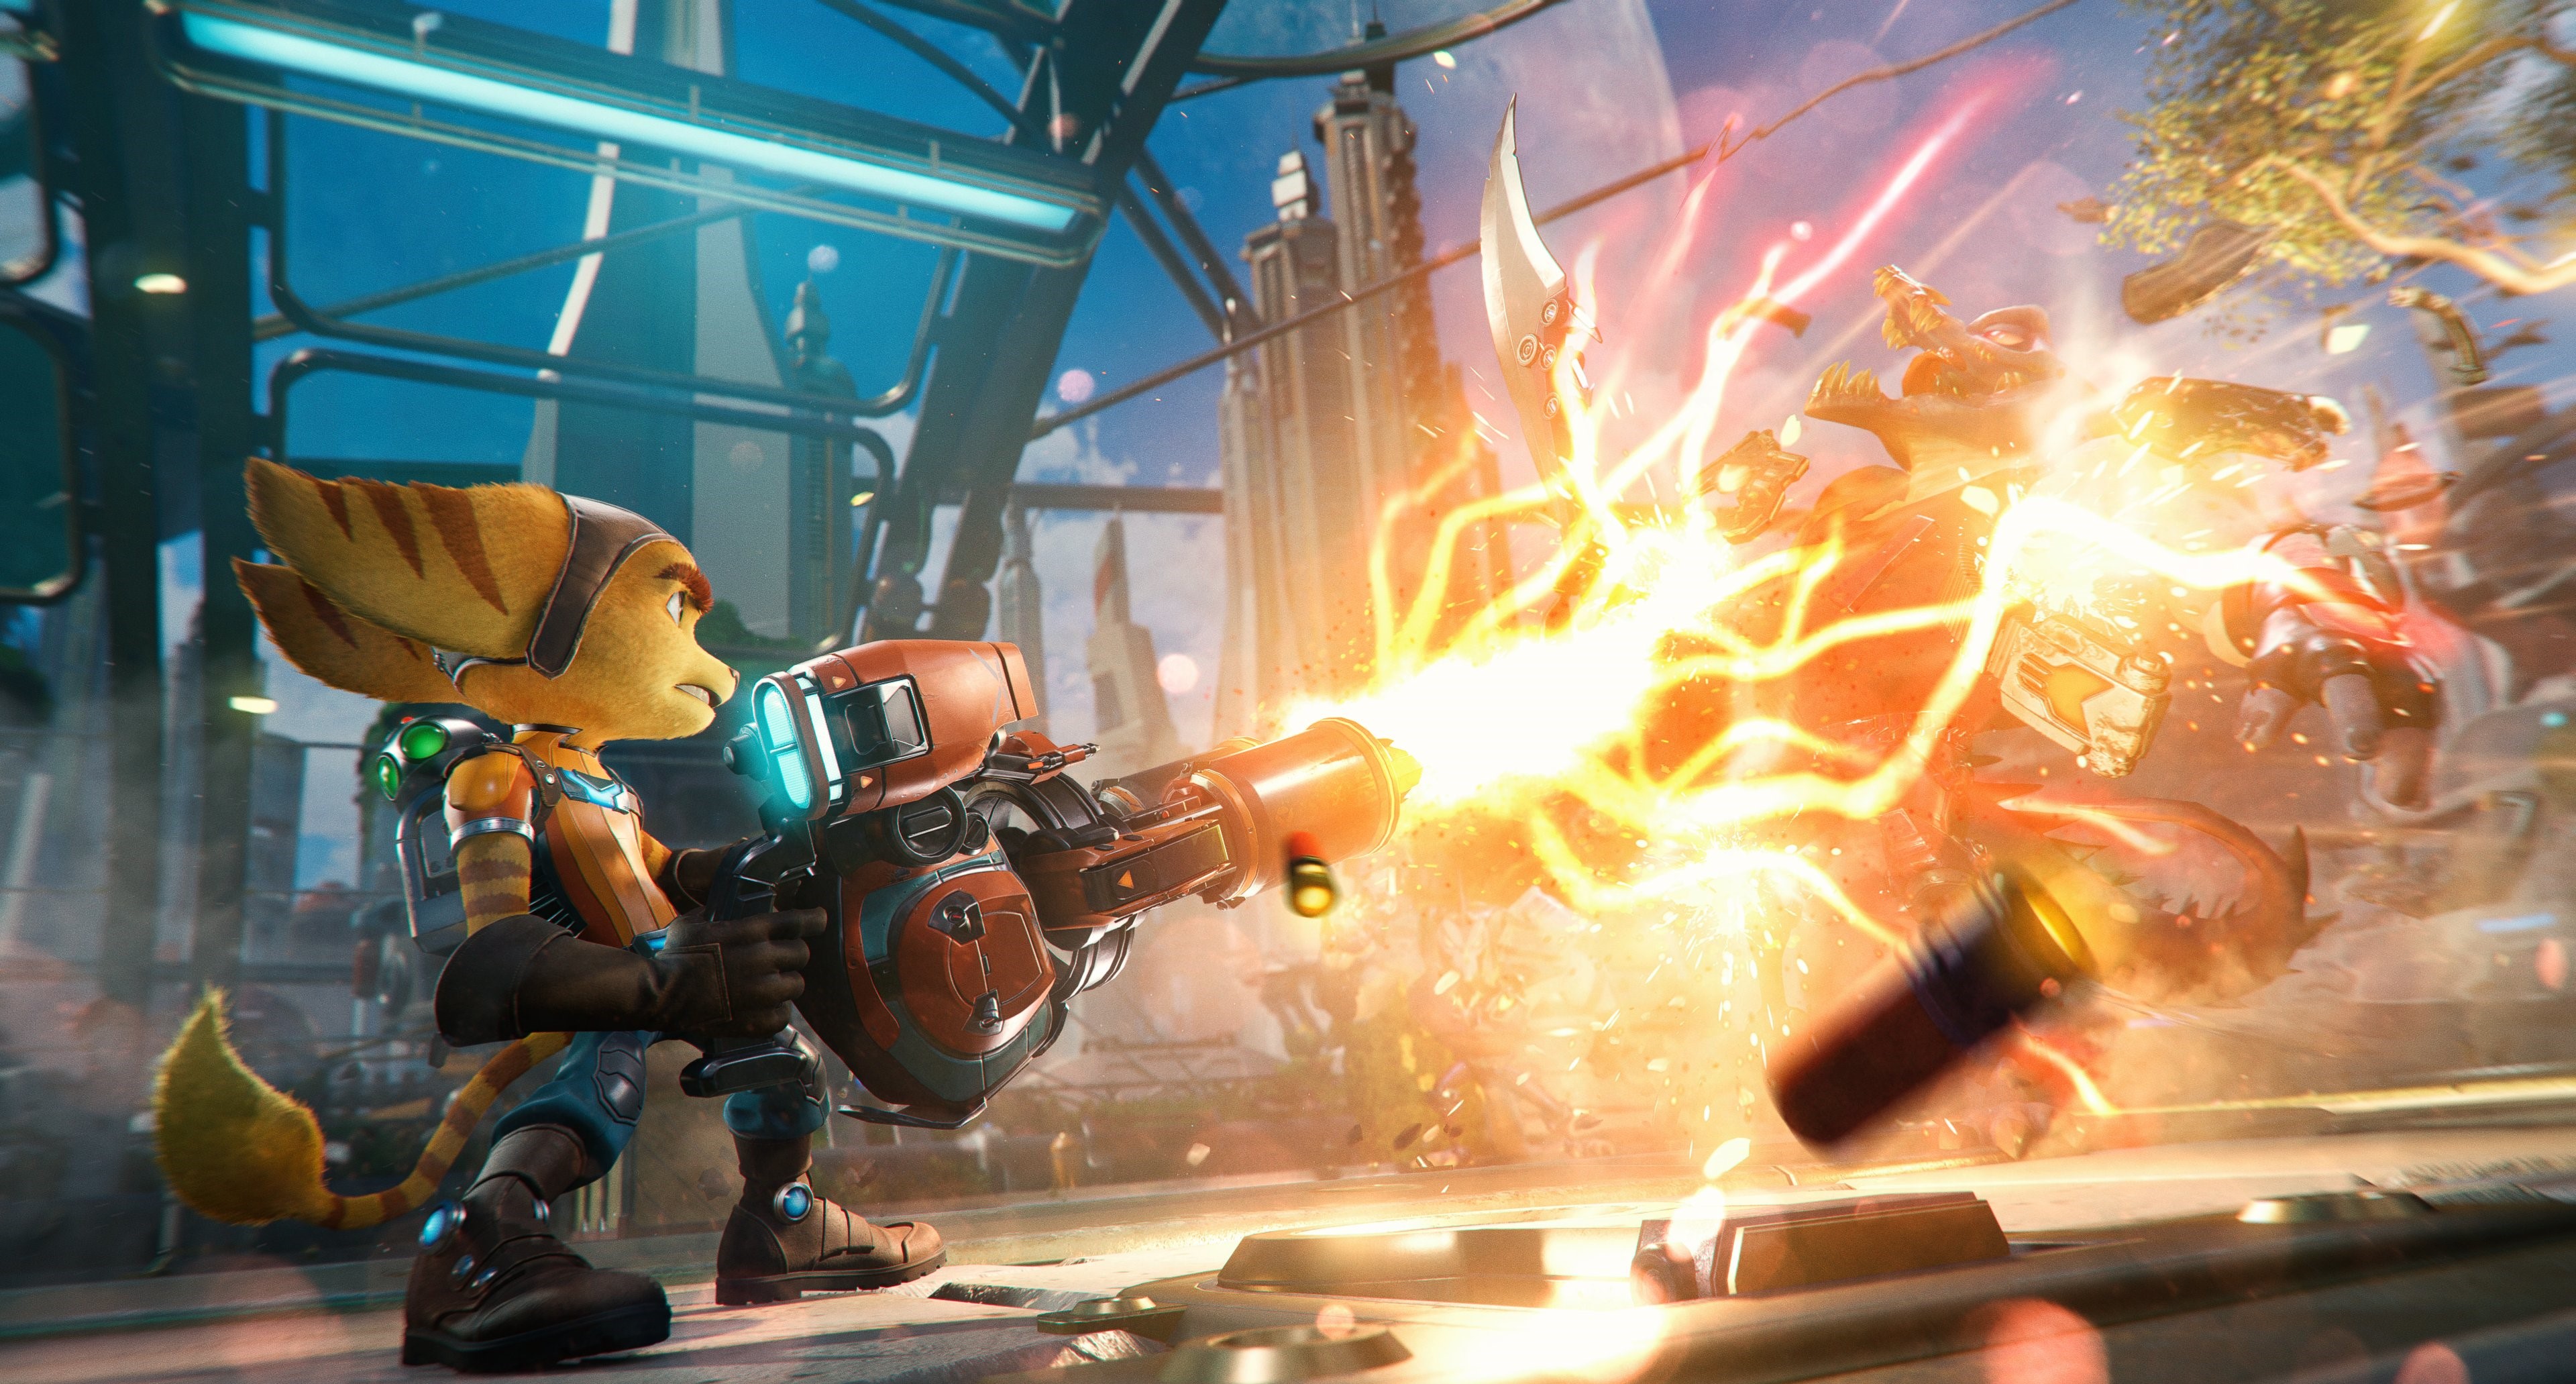 Everything You Need To Know Before Playing Ratchet & Clank: Rift Apart